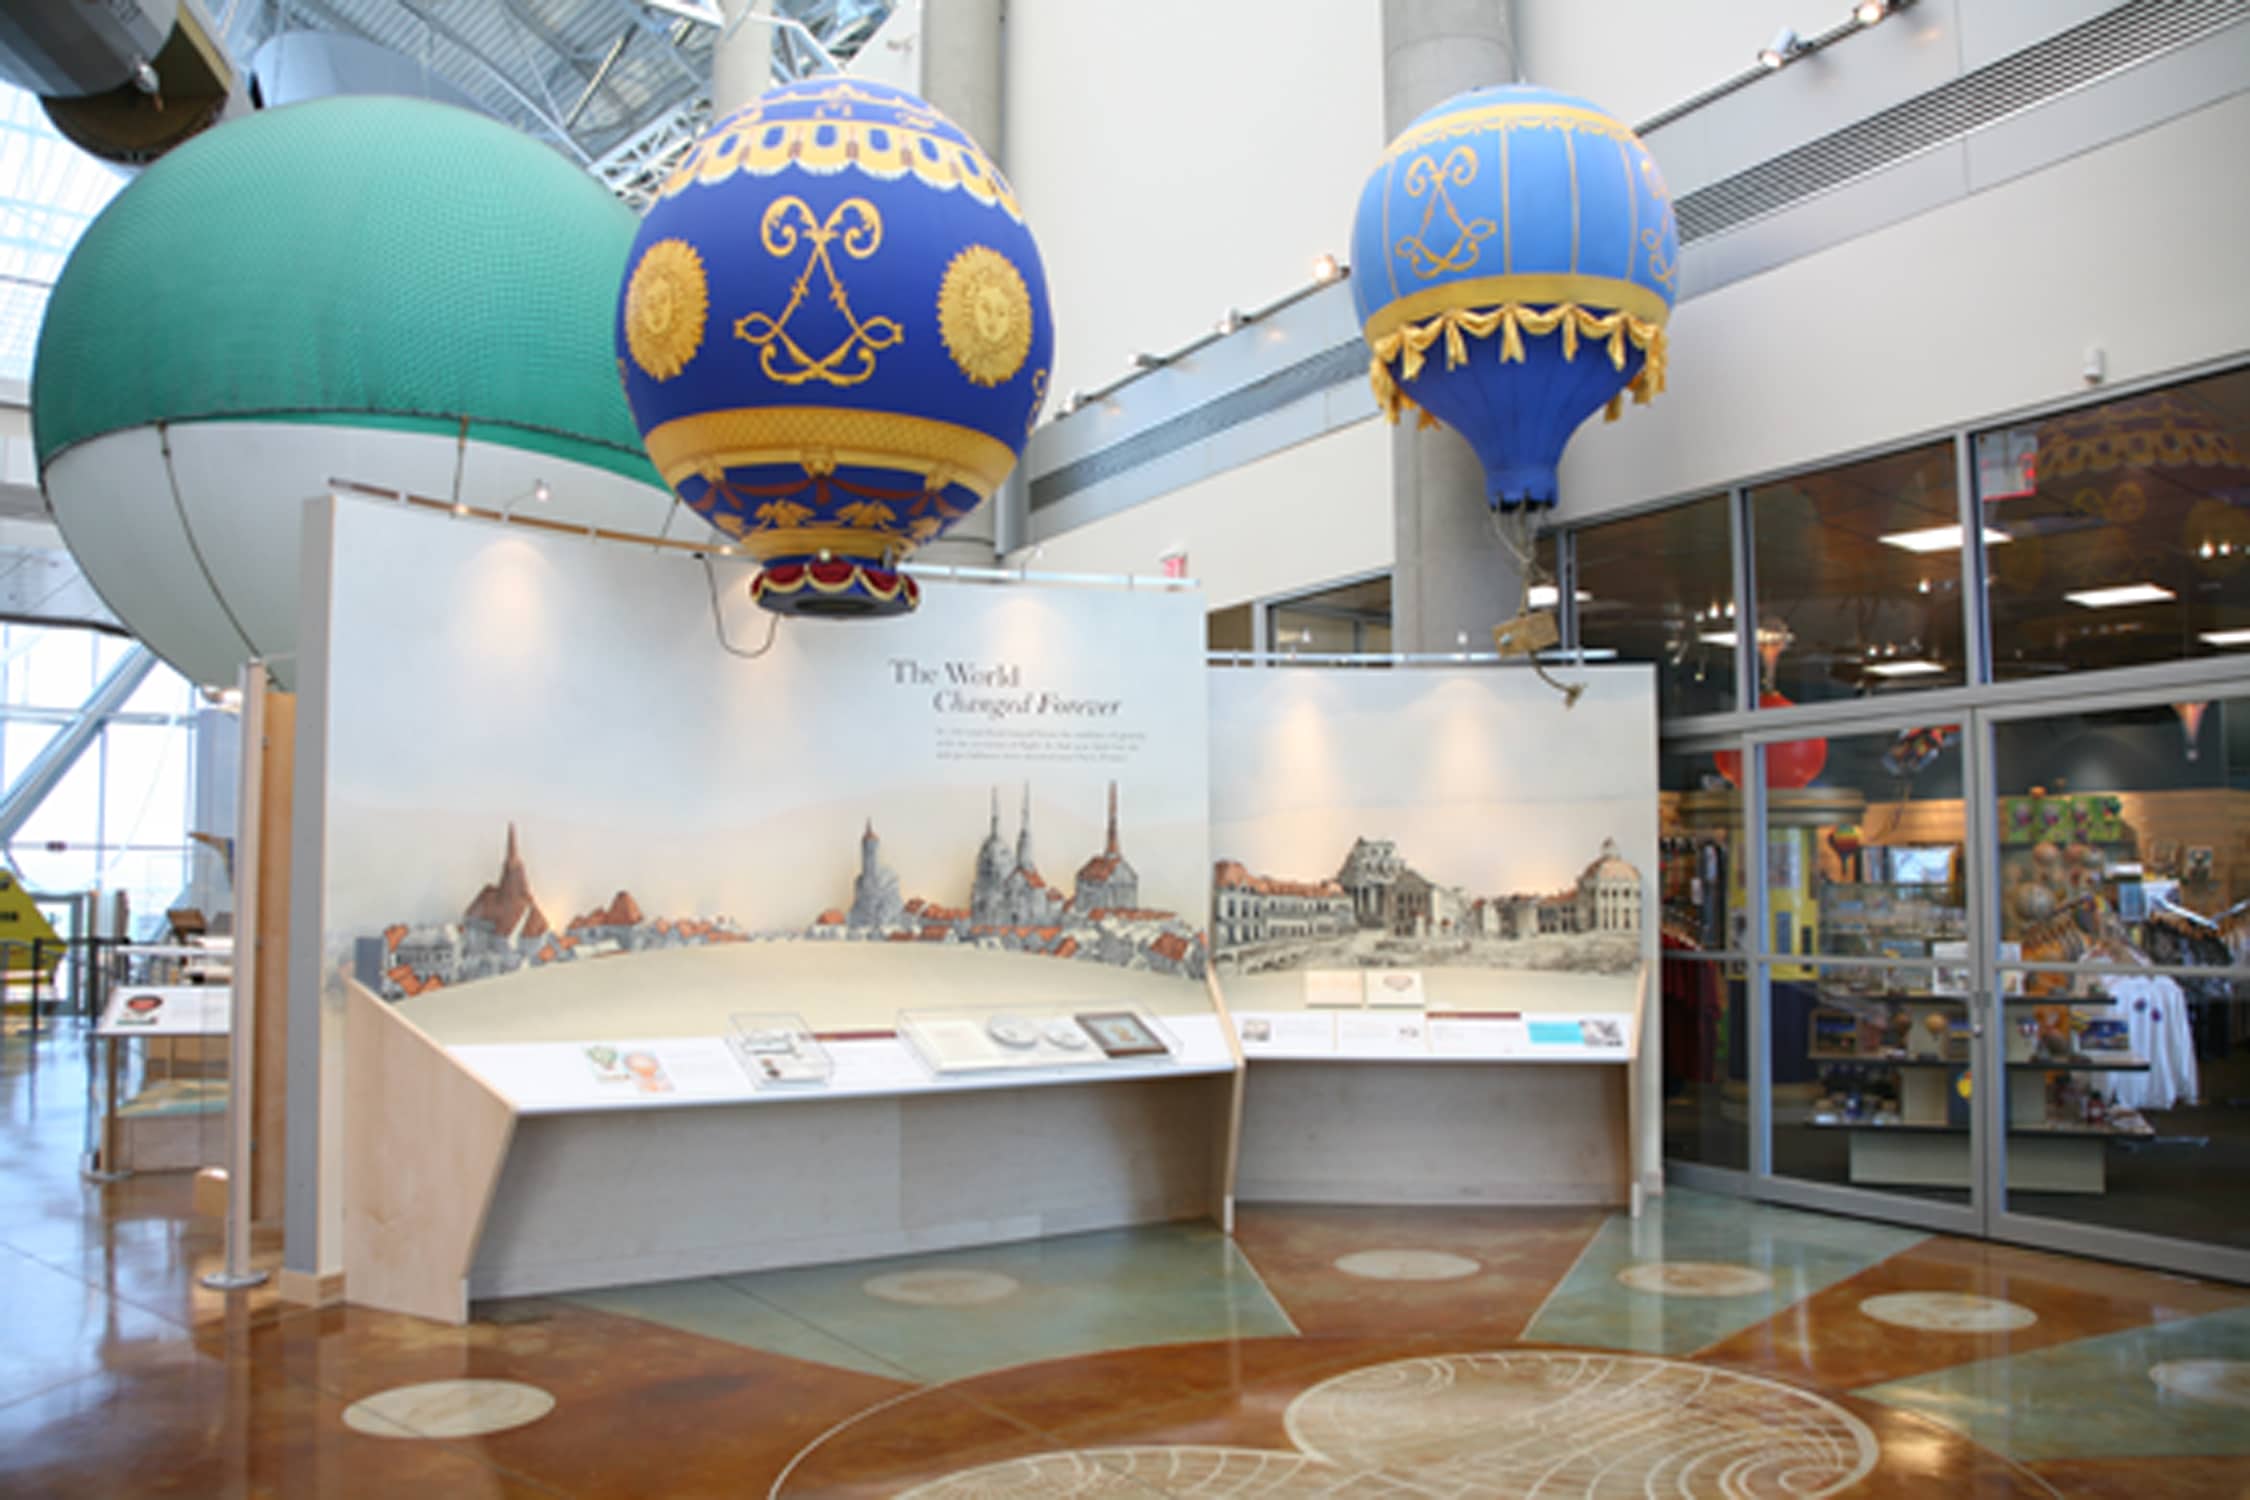 Learn all about hot air ballooning at Anderson-Abruzzo International Balloon Museum